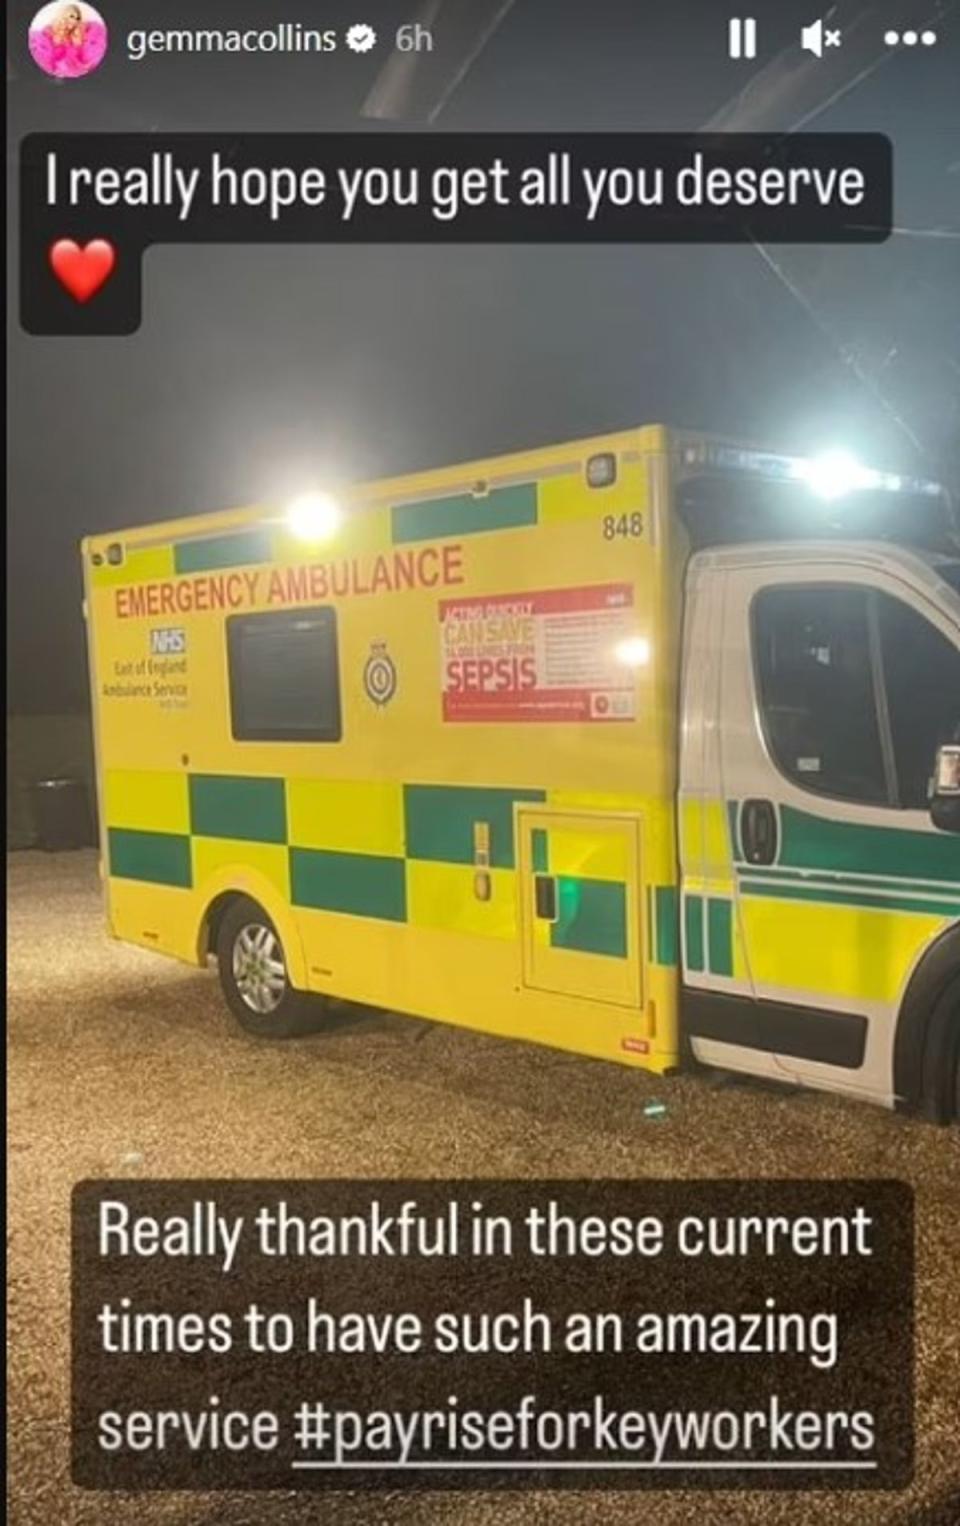 The TOWIE star took to her IG Story to thank the ambulance service (Instagram/GemmaCollins)